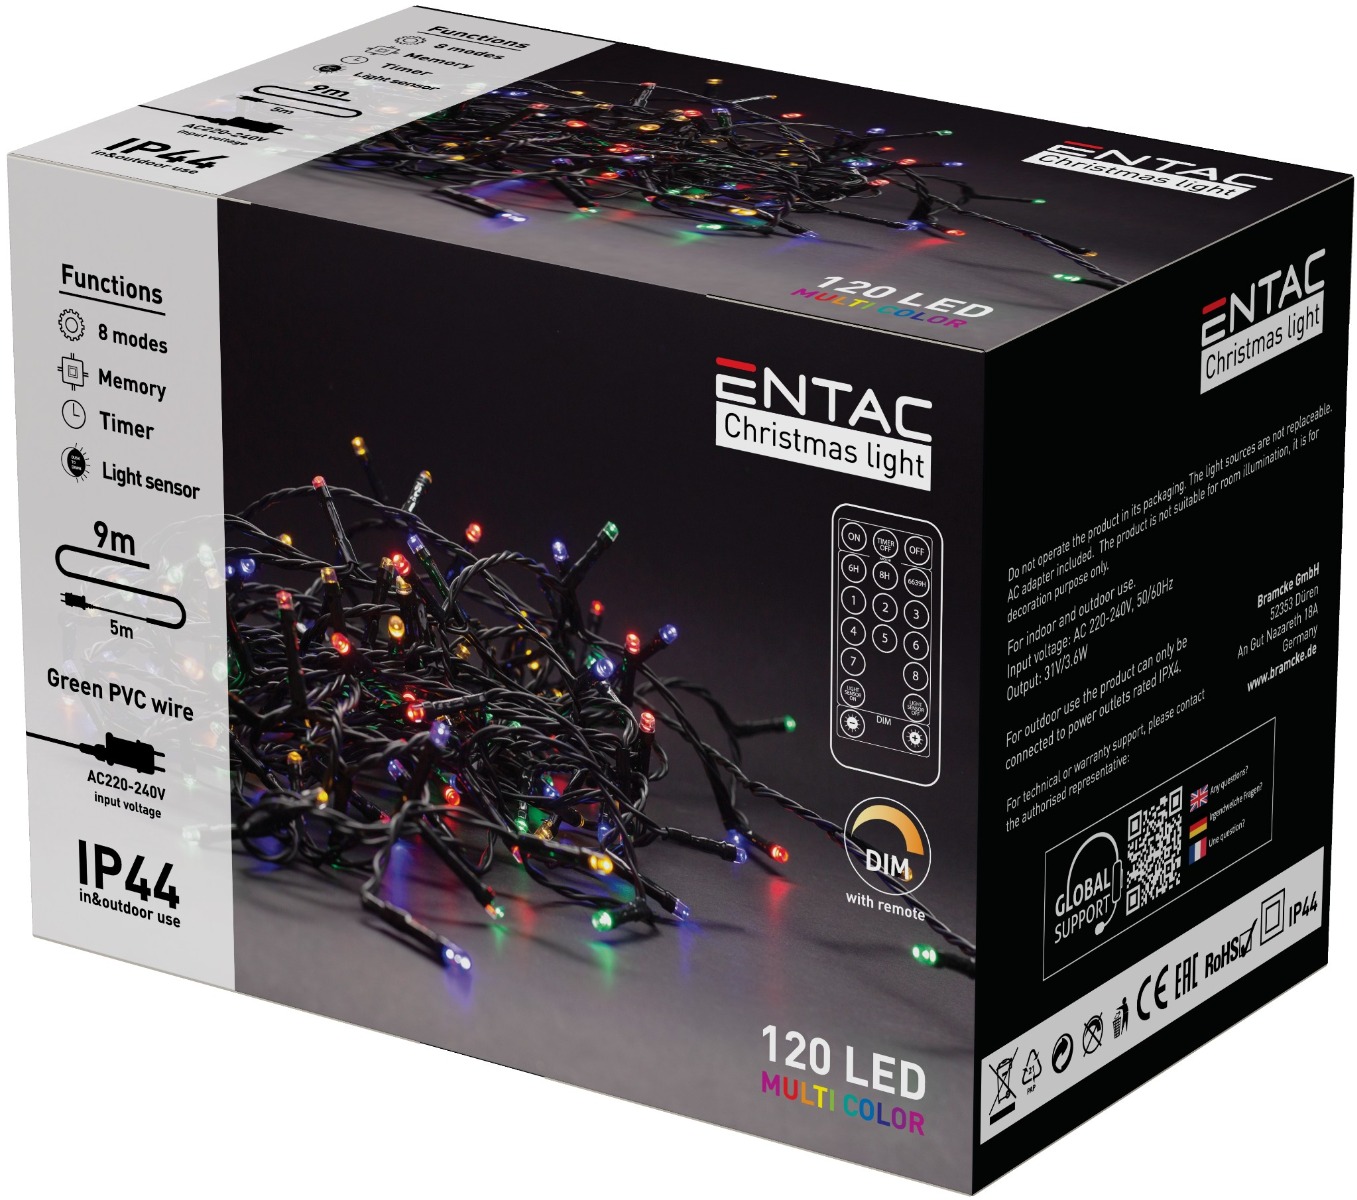 Entac Christmas IP44 120 LED Light Multicolor 9m with Remote